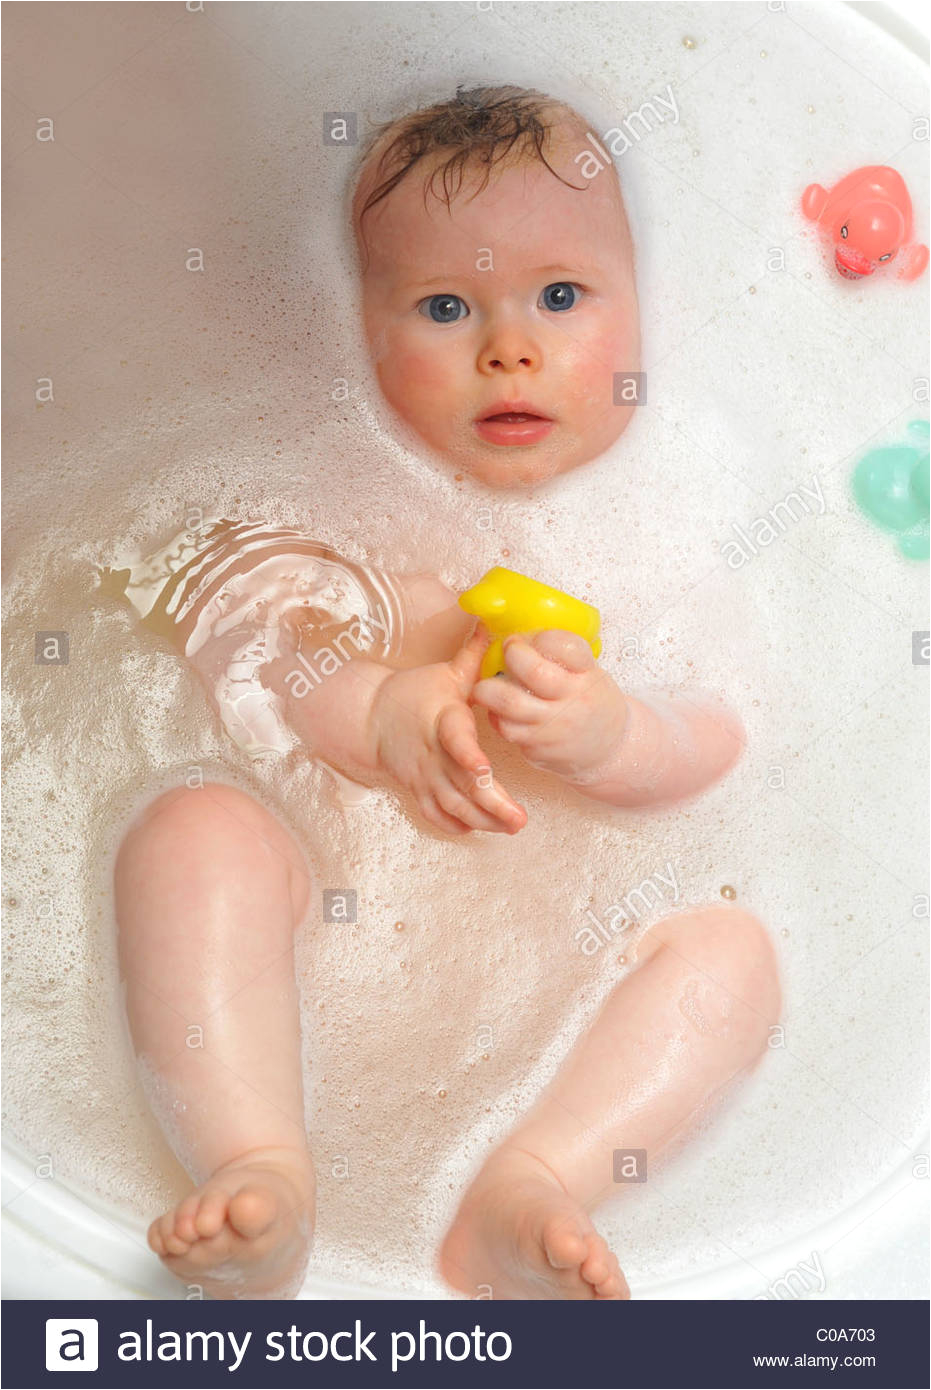 stock photo cute 6 month old baby bath bathtime toy ducks play infant clean lovely